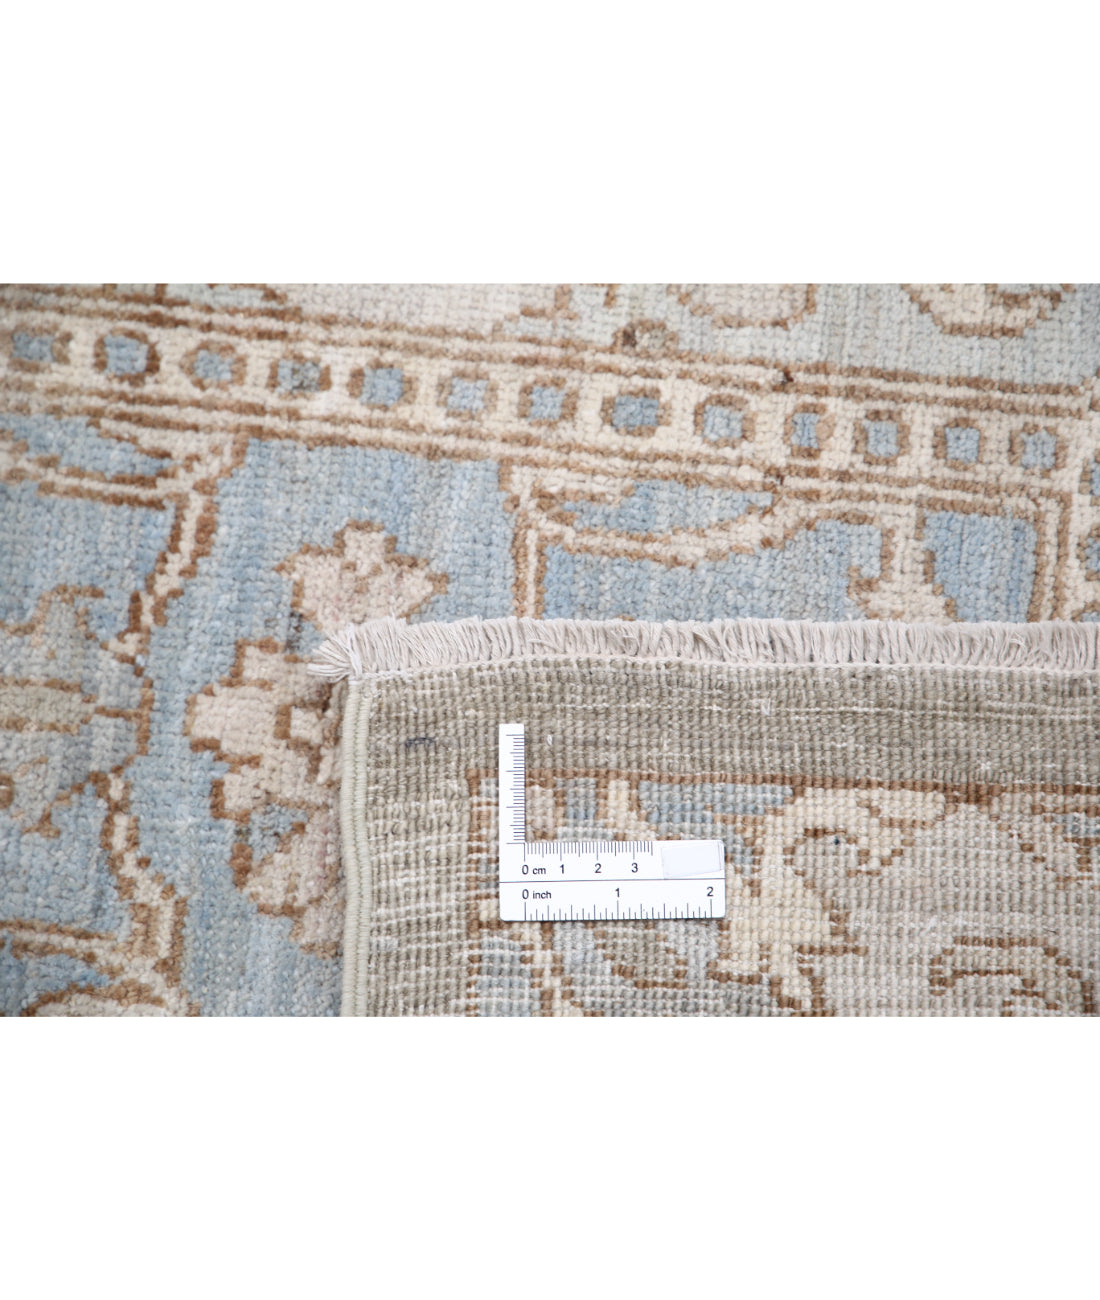 Hand Knotted Serenity Wool Rug - 7'8'' x 9'8'' 7'8'' x 9'8'' (230 X 290) / Green / N/A